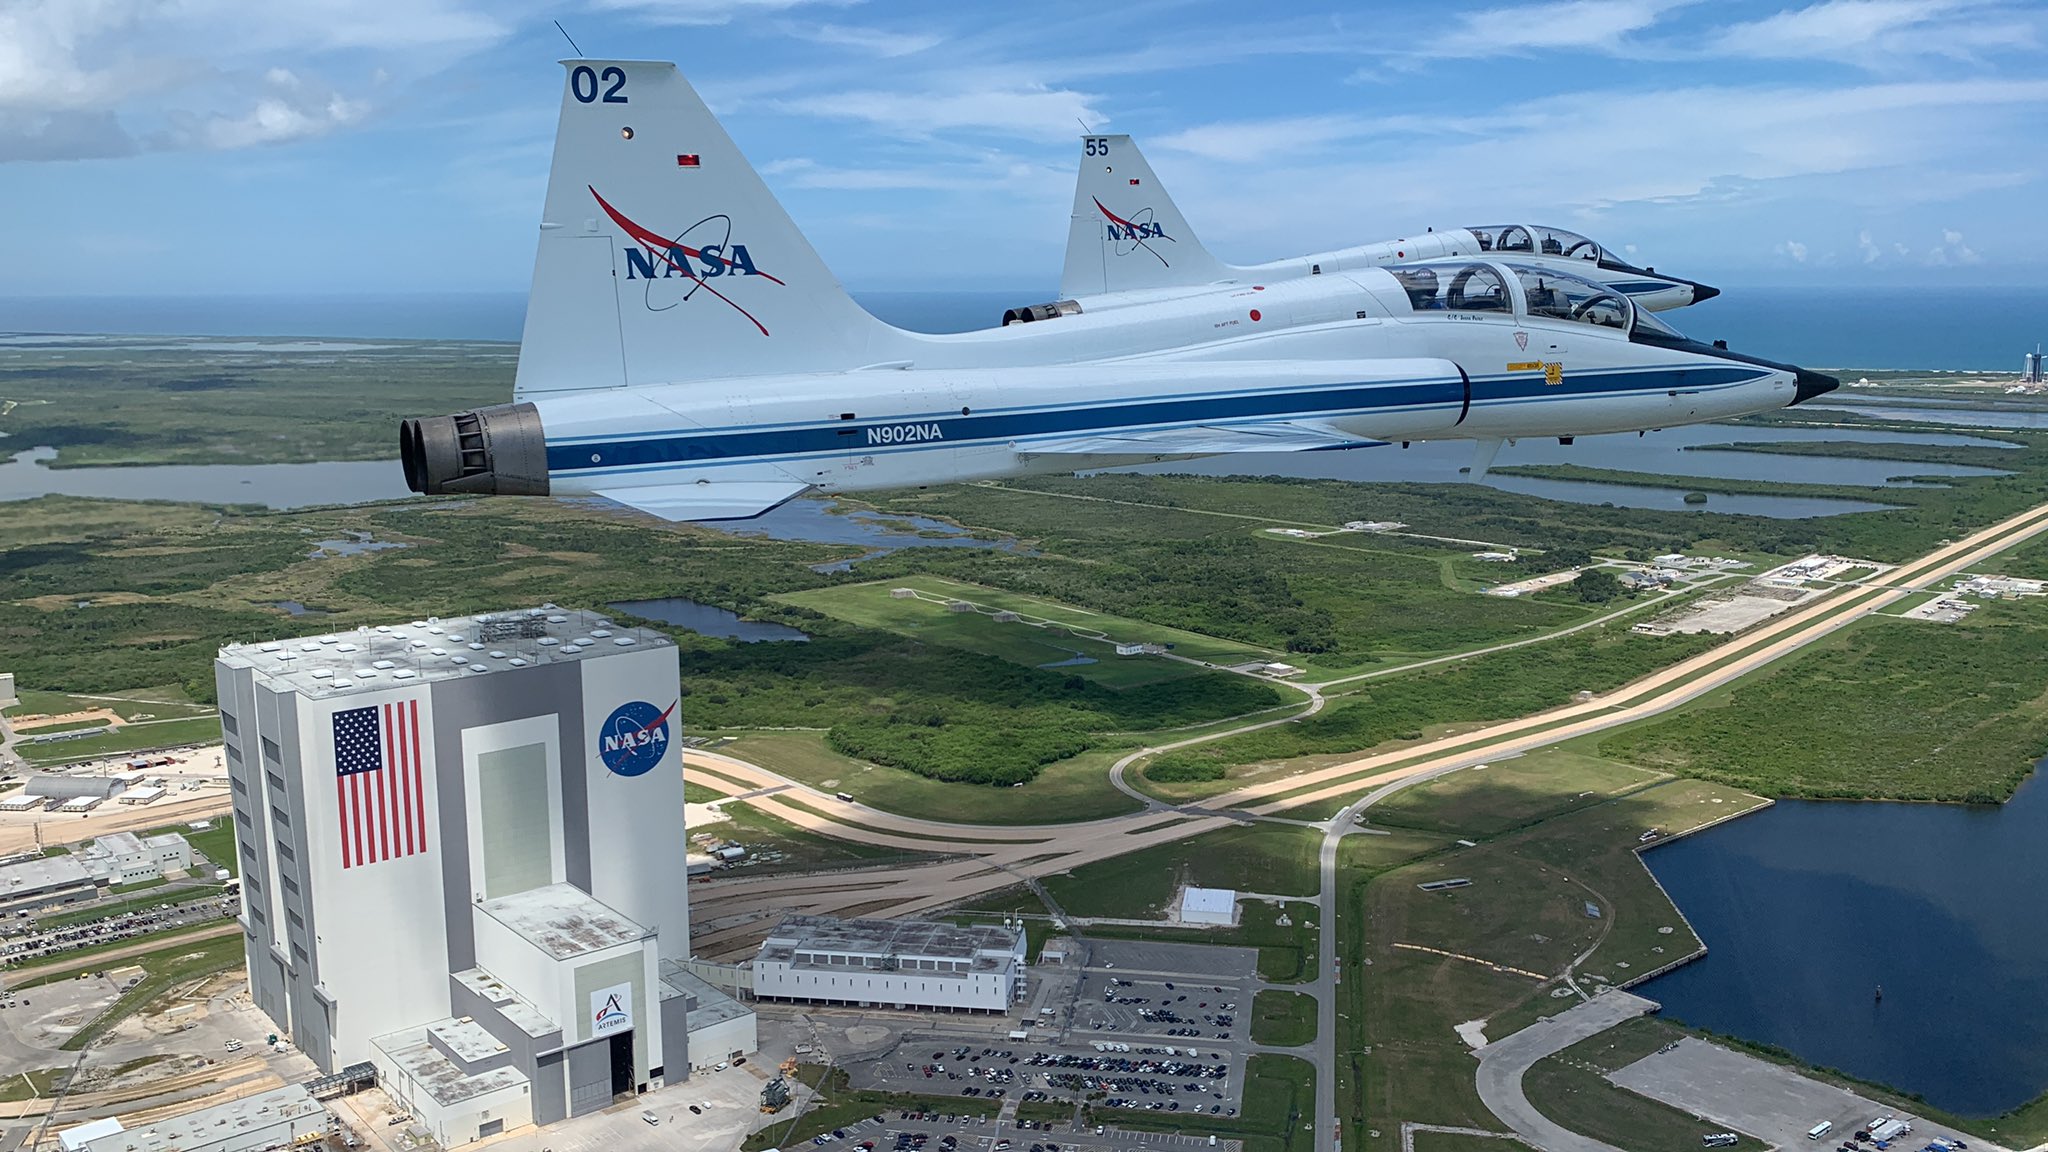 A pair of NASA T-38 jets fly past launch complex 39B at Kennedy Space Center.